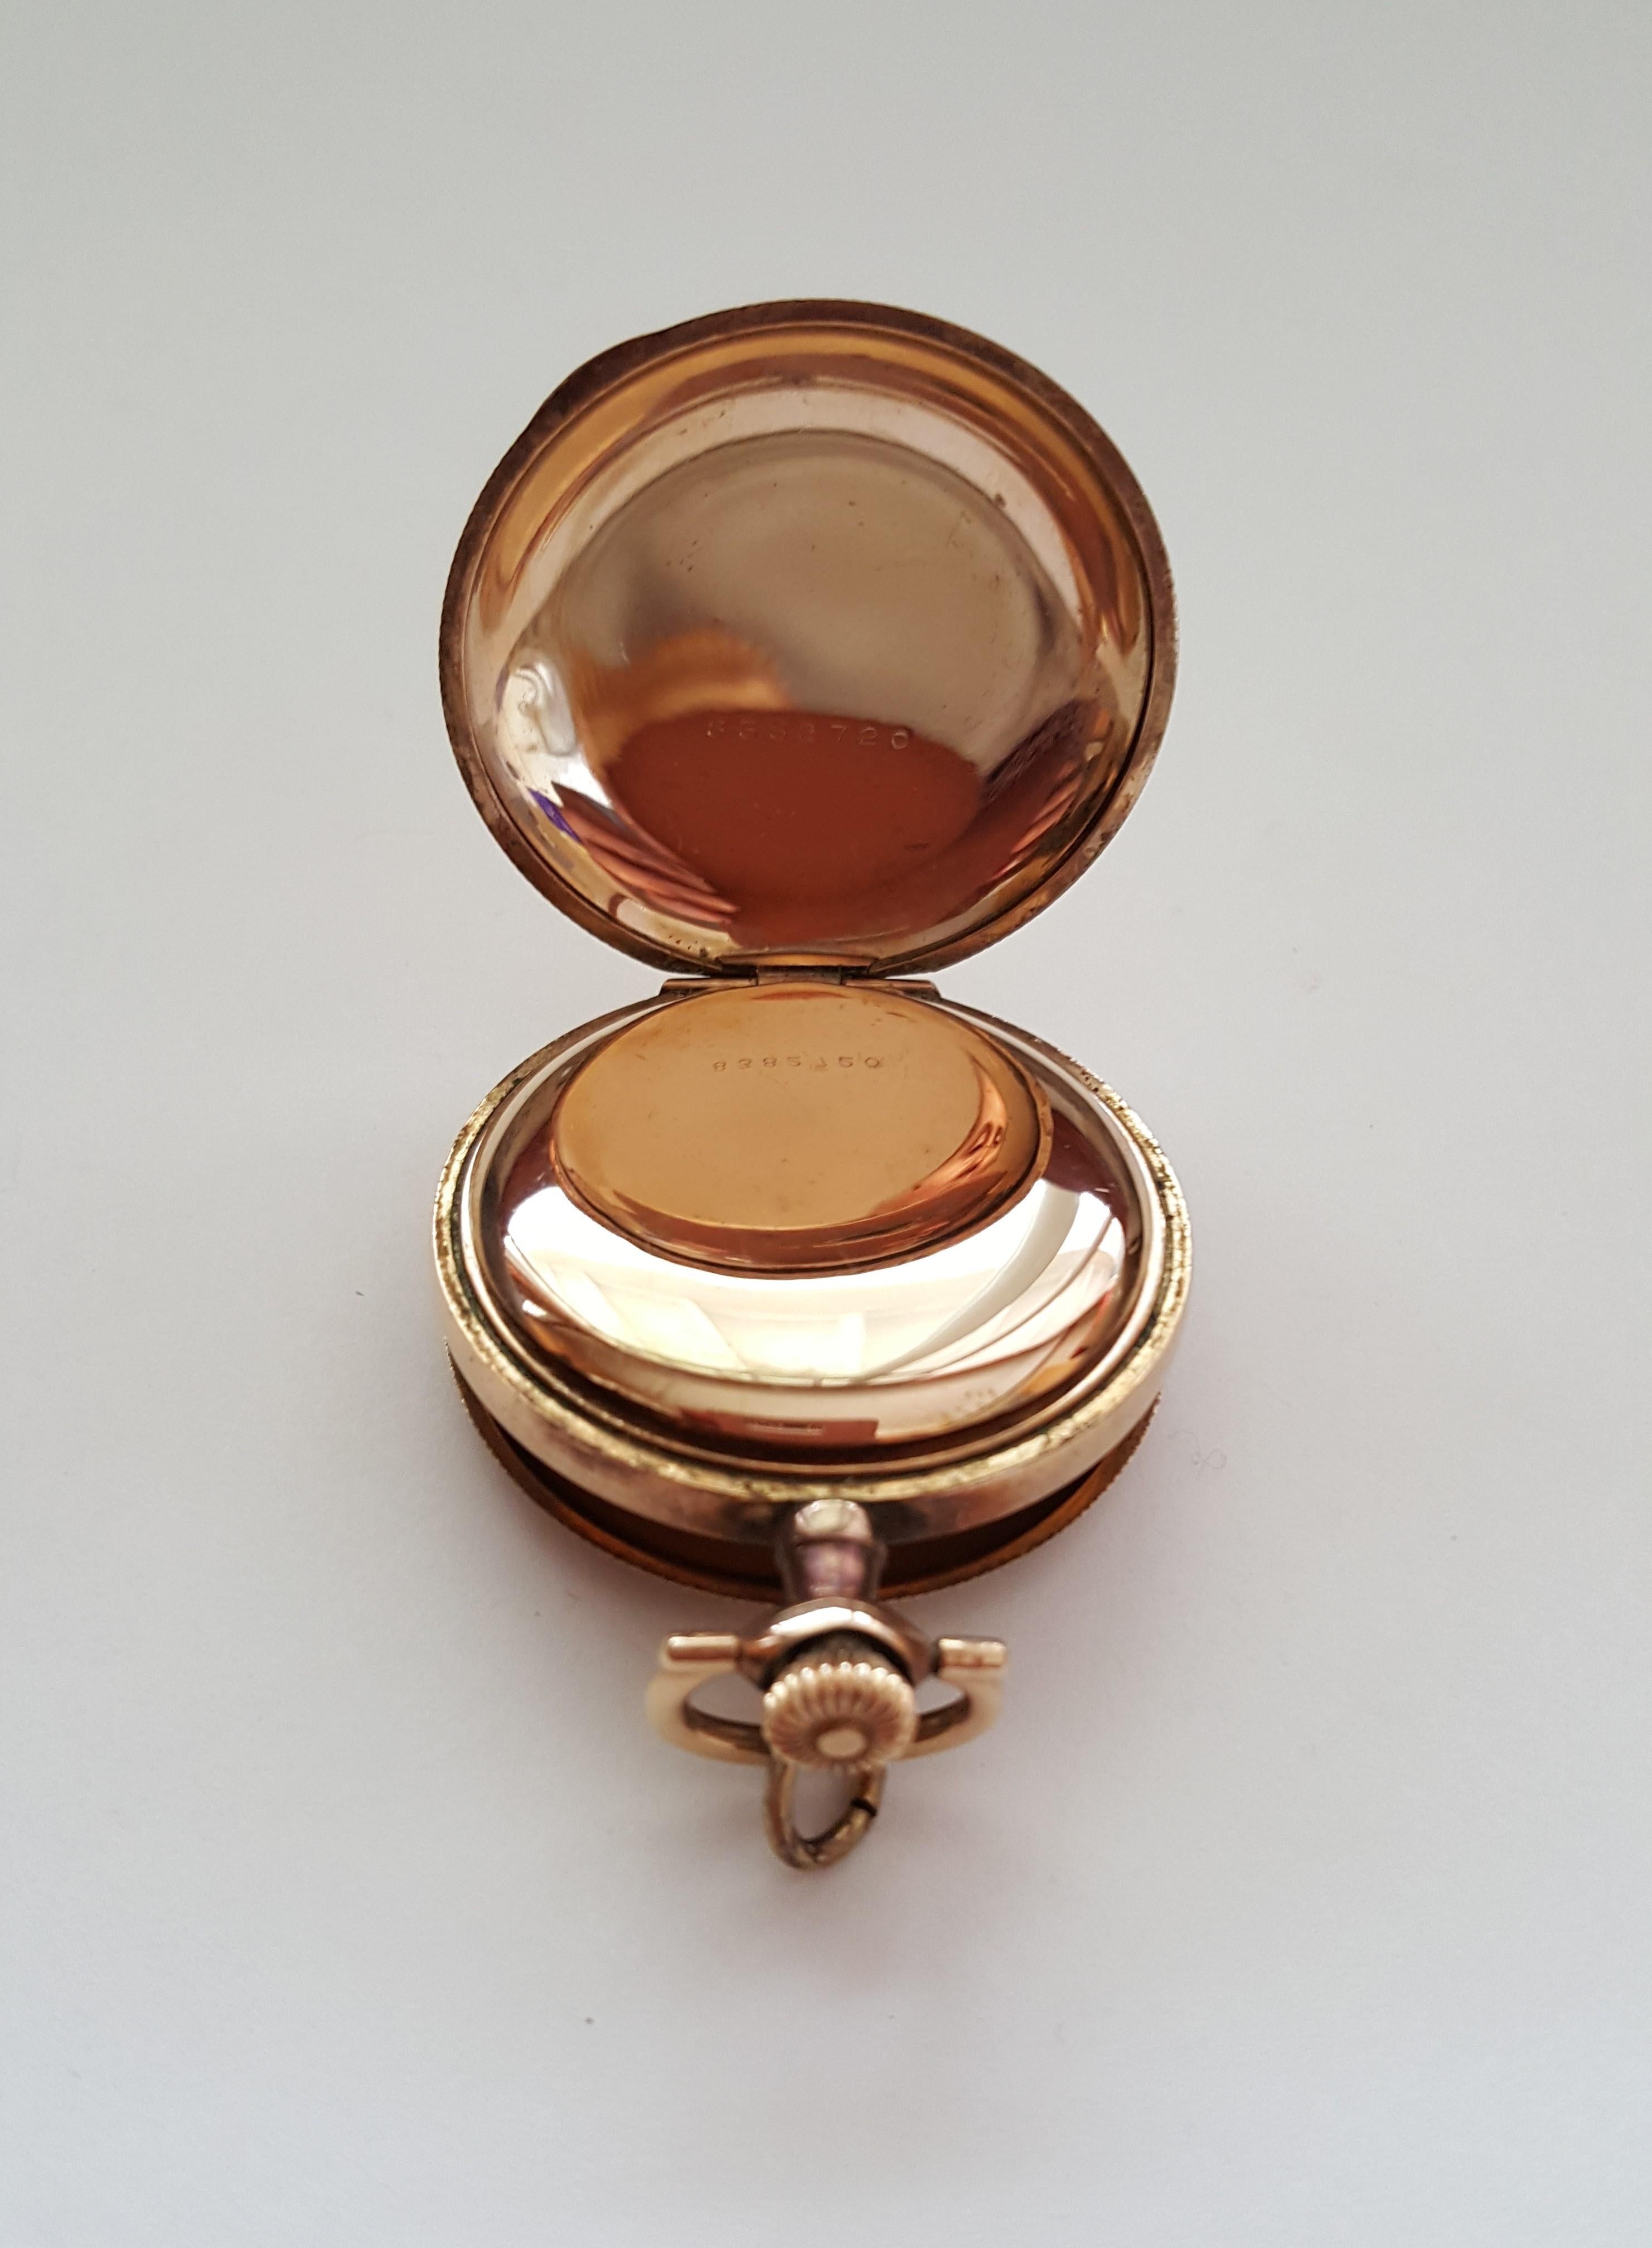 Women's or Men's Vintage 1909 Gold-Plated Elgin Pocket Watch, Working, Very Good Condition